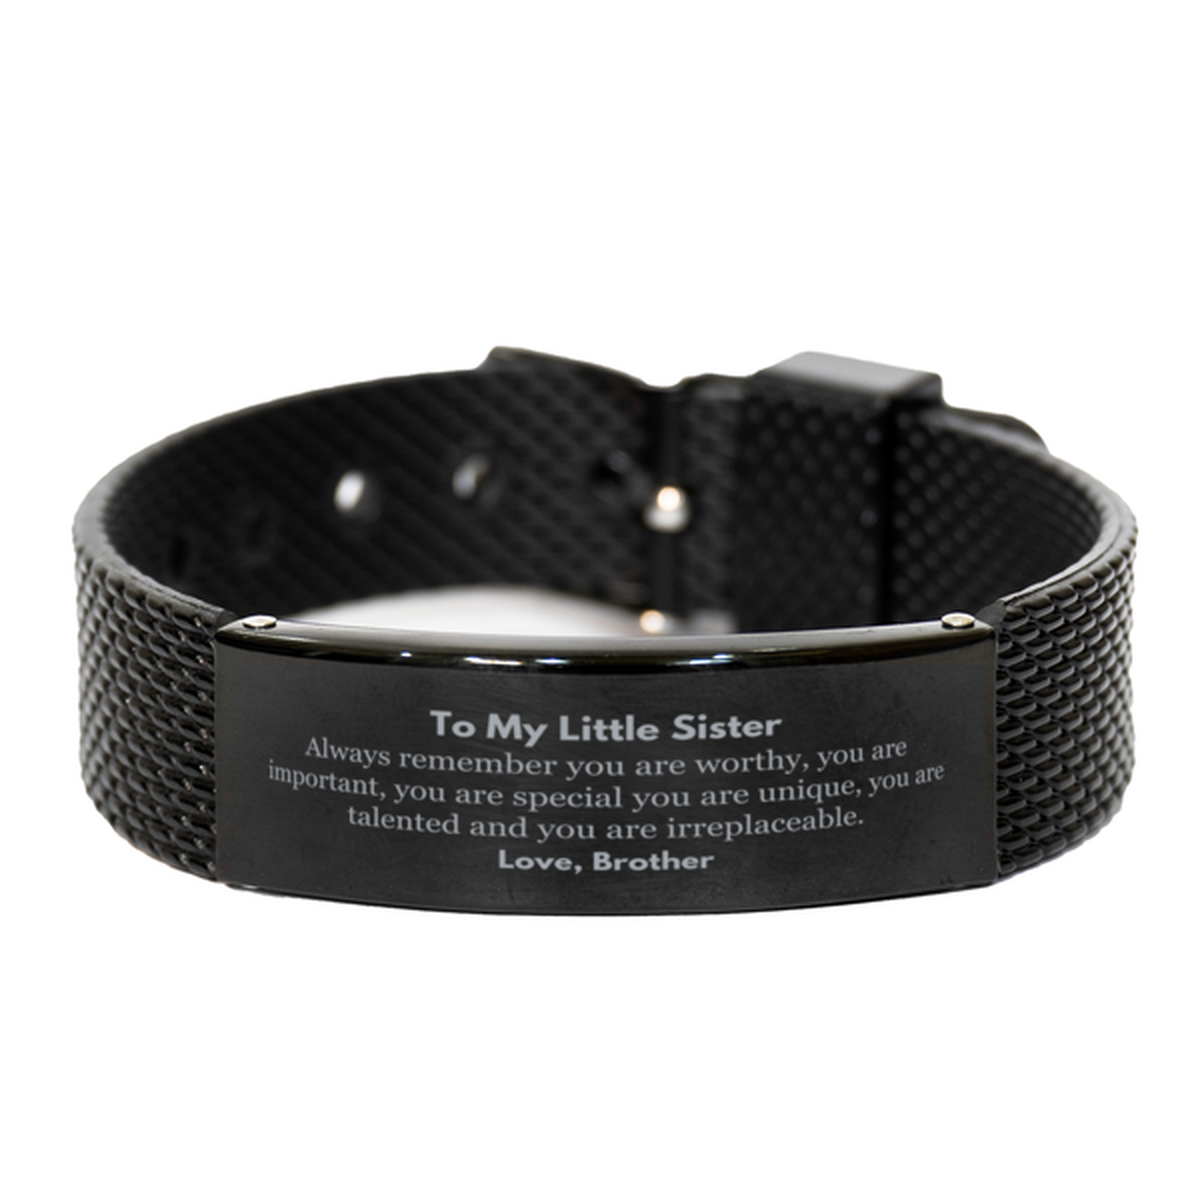 Little Sister Birthday Gifts from Brother, Inspirational Black Shark Mesh Bracelet for Little Sister Christmas Graduation Gifts for Little Sister Always remember you are worthy, you are important. Love, Brother